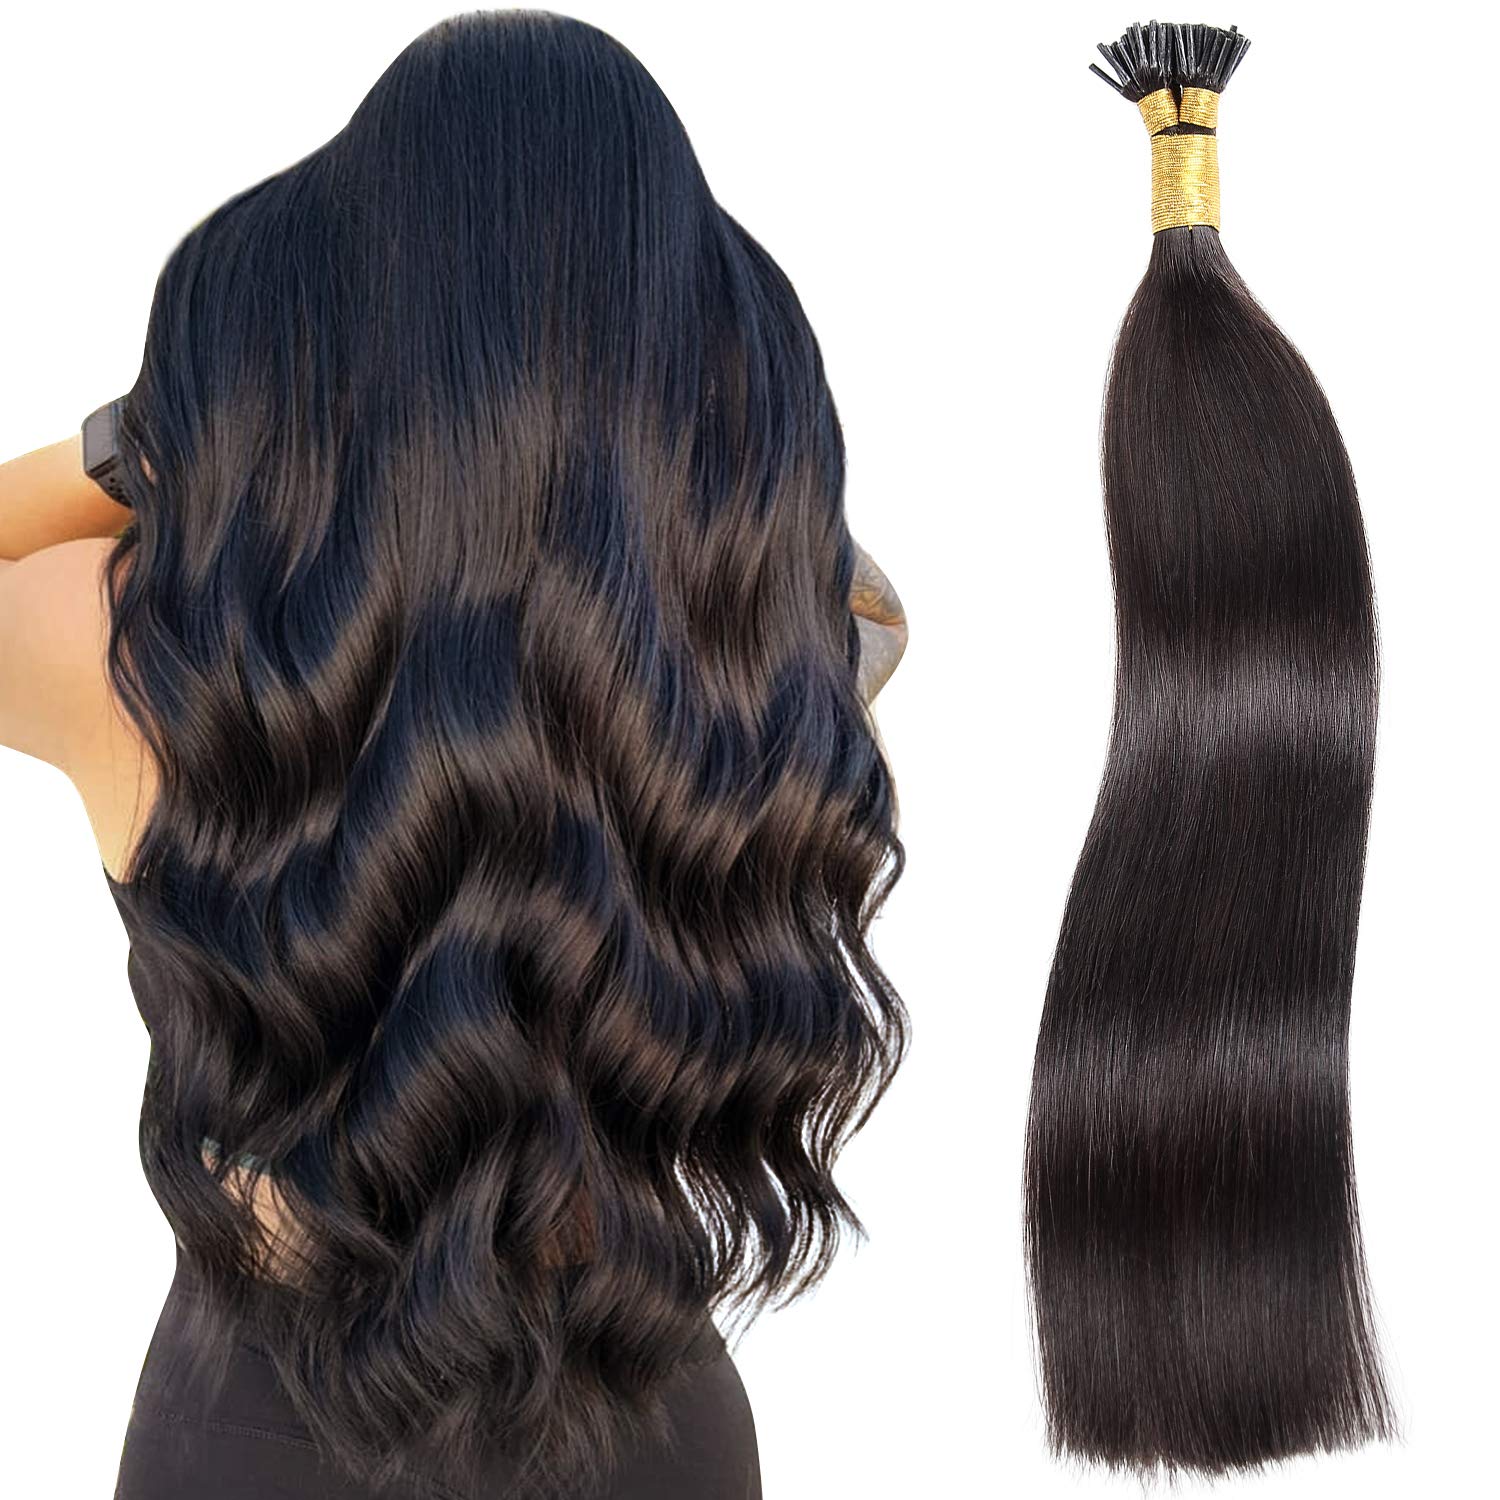 V shape hair extensions: New product with many impressive features in hair market